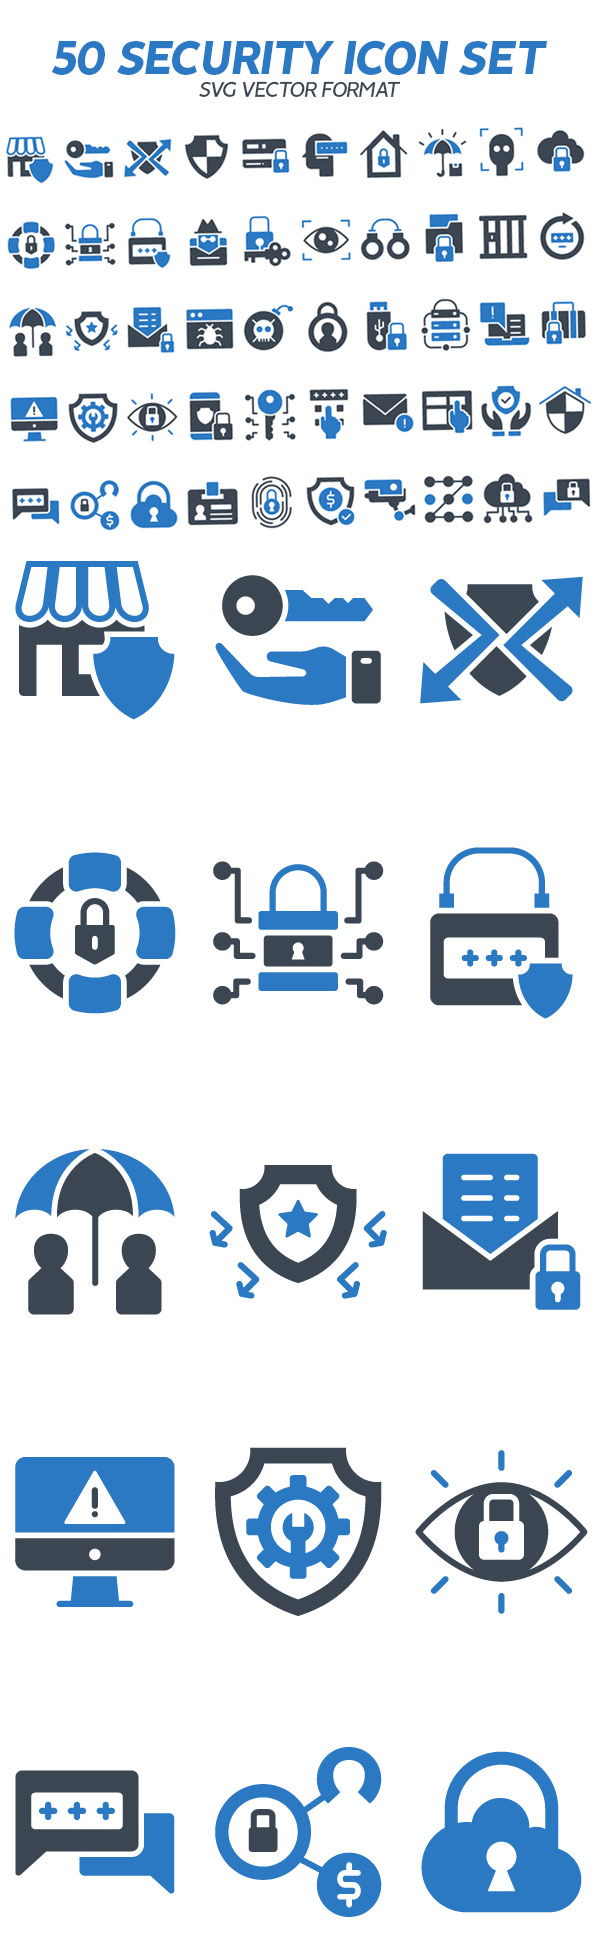 Freebies for 2019: 50 Free Security Vector Icon Set (SVG)